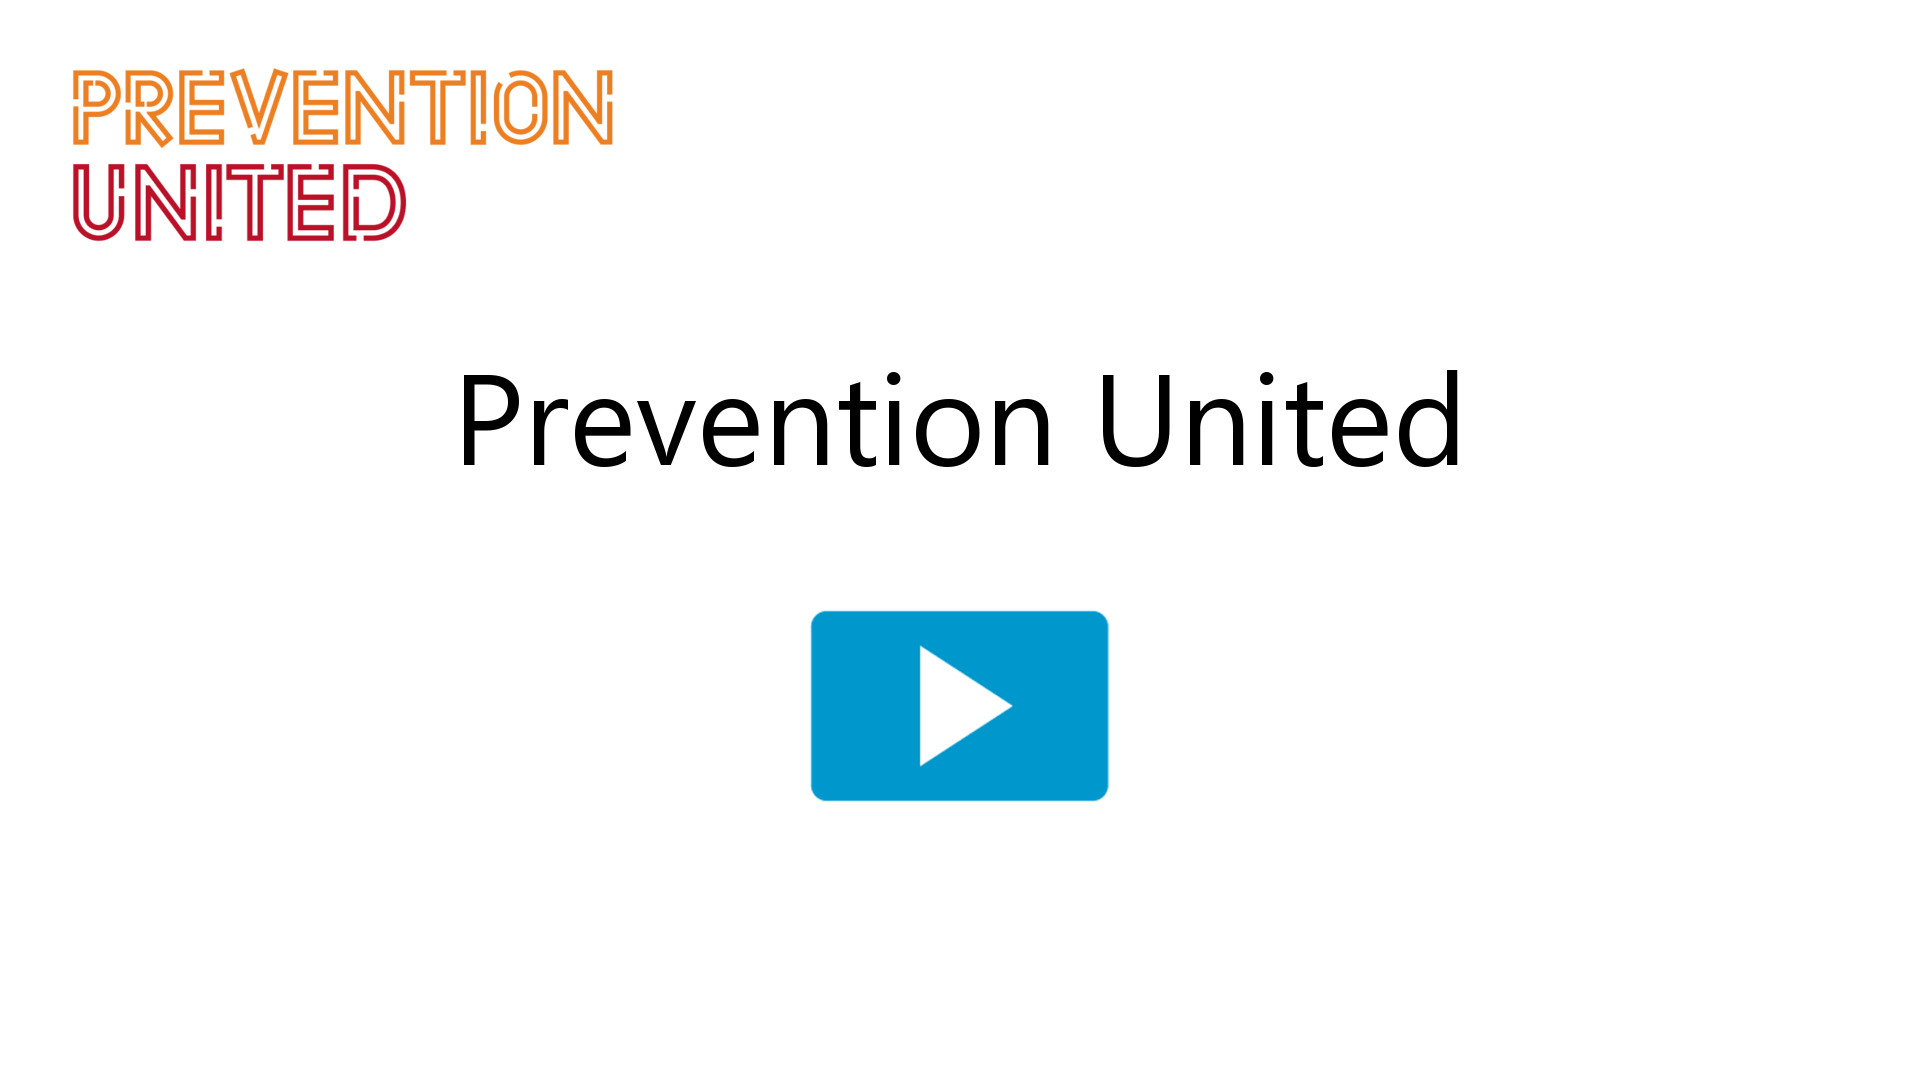 More about Prevention United